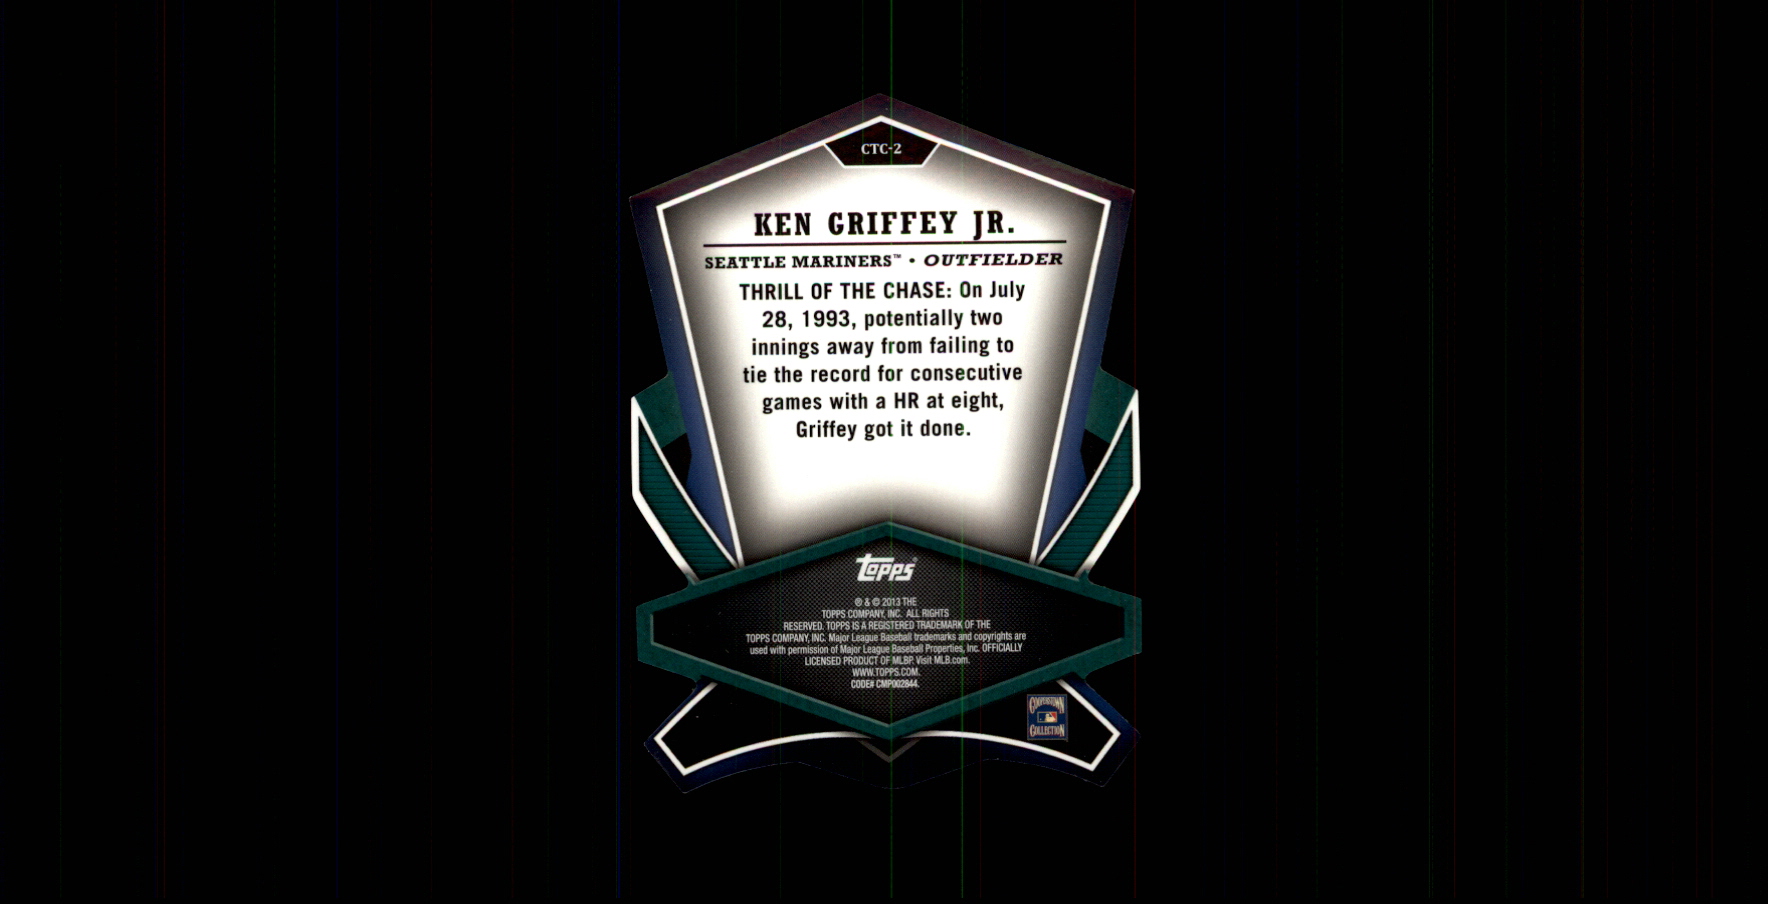 2013 Topps Cut To The Chase #CTC2 Ken Griffey Jr. back image